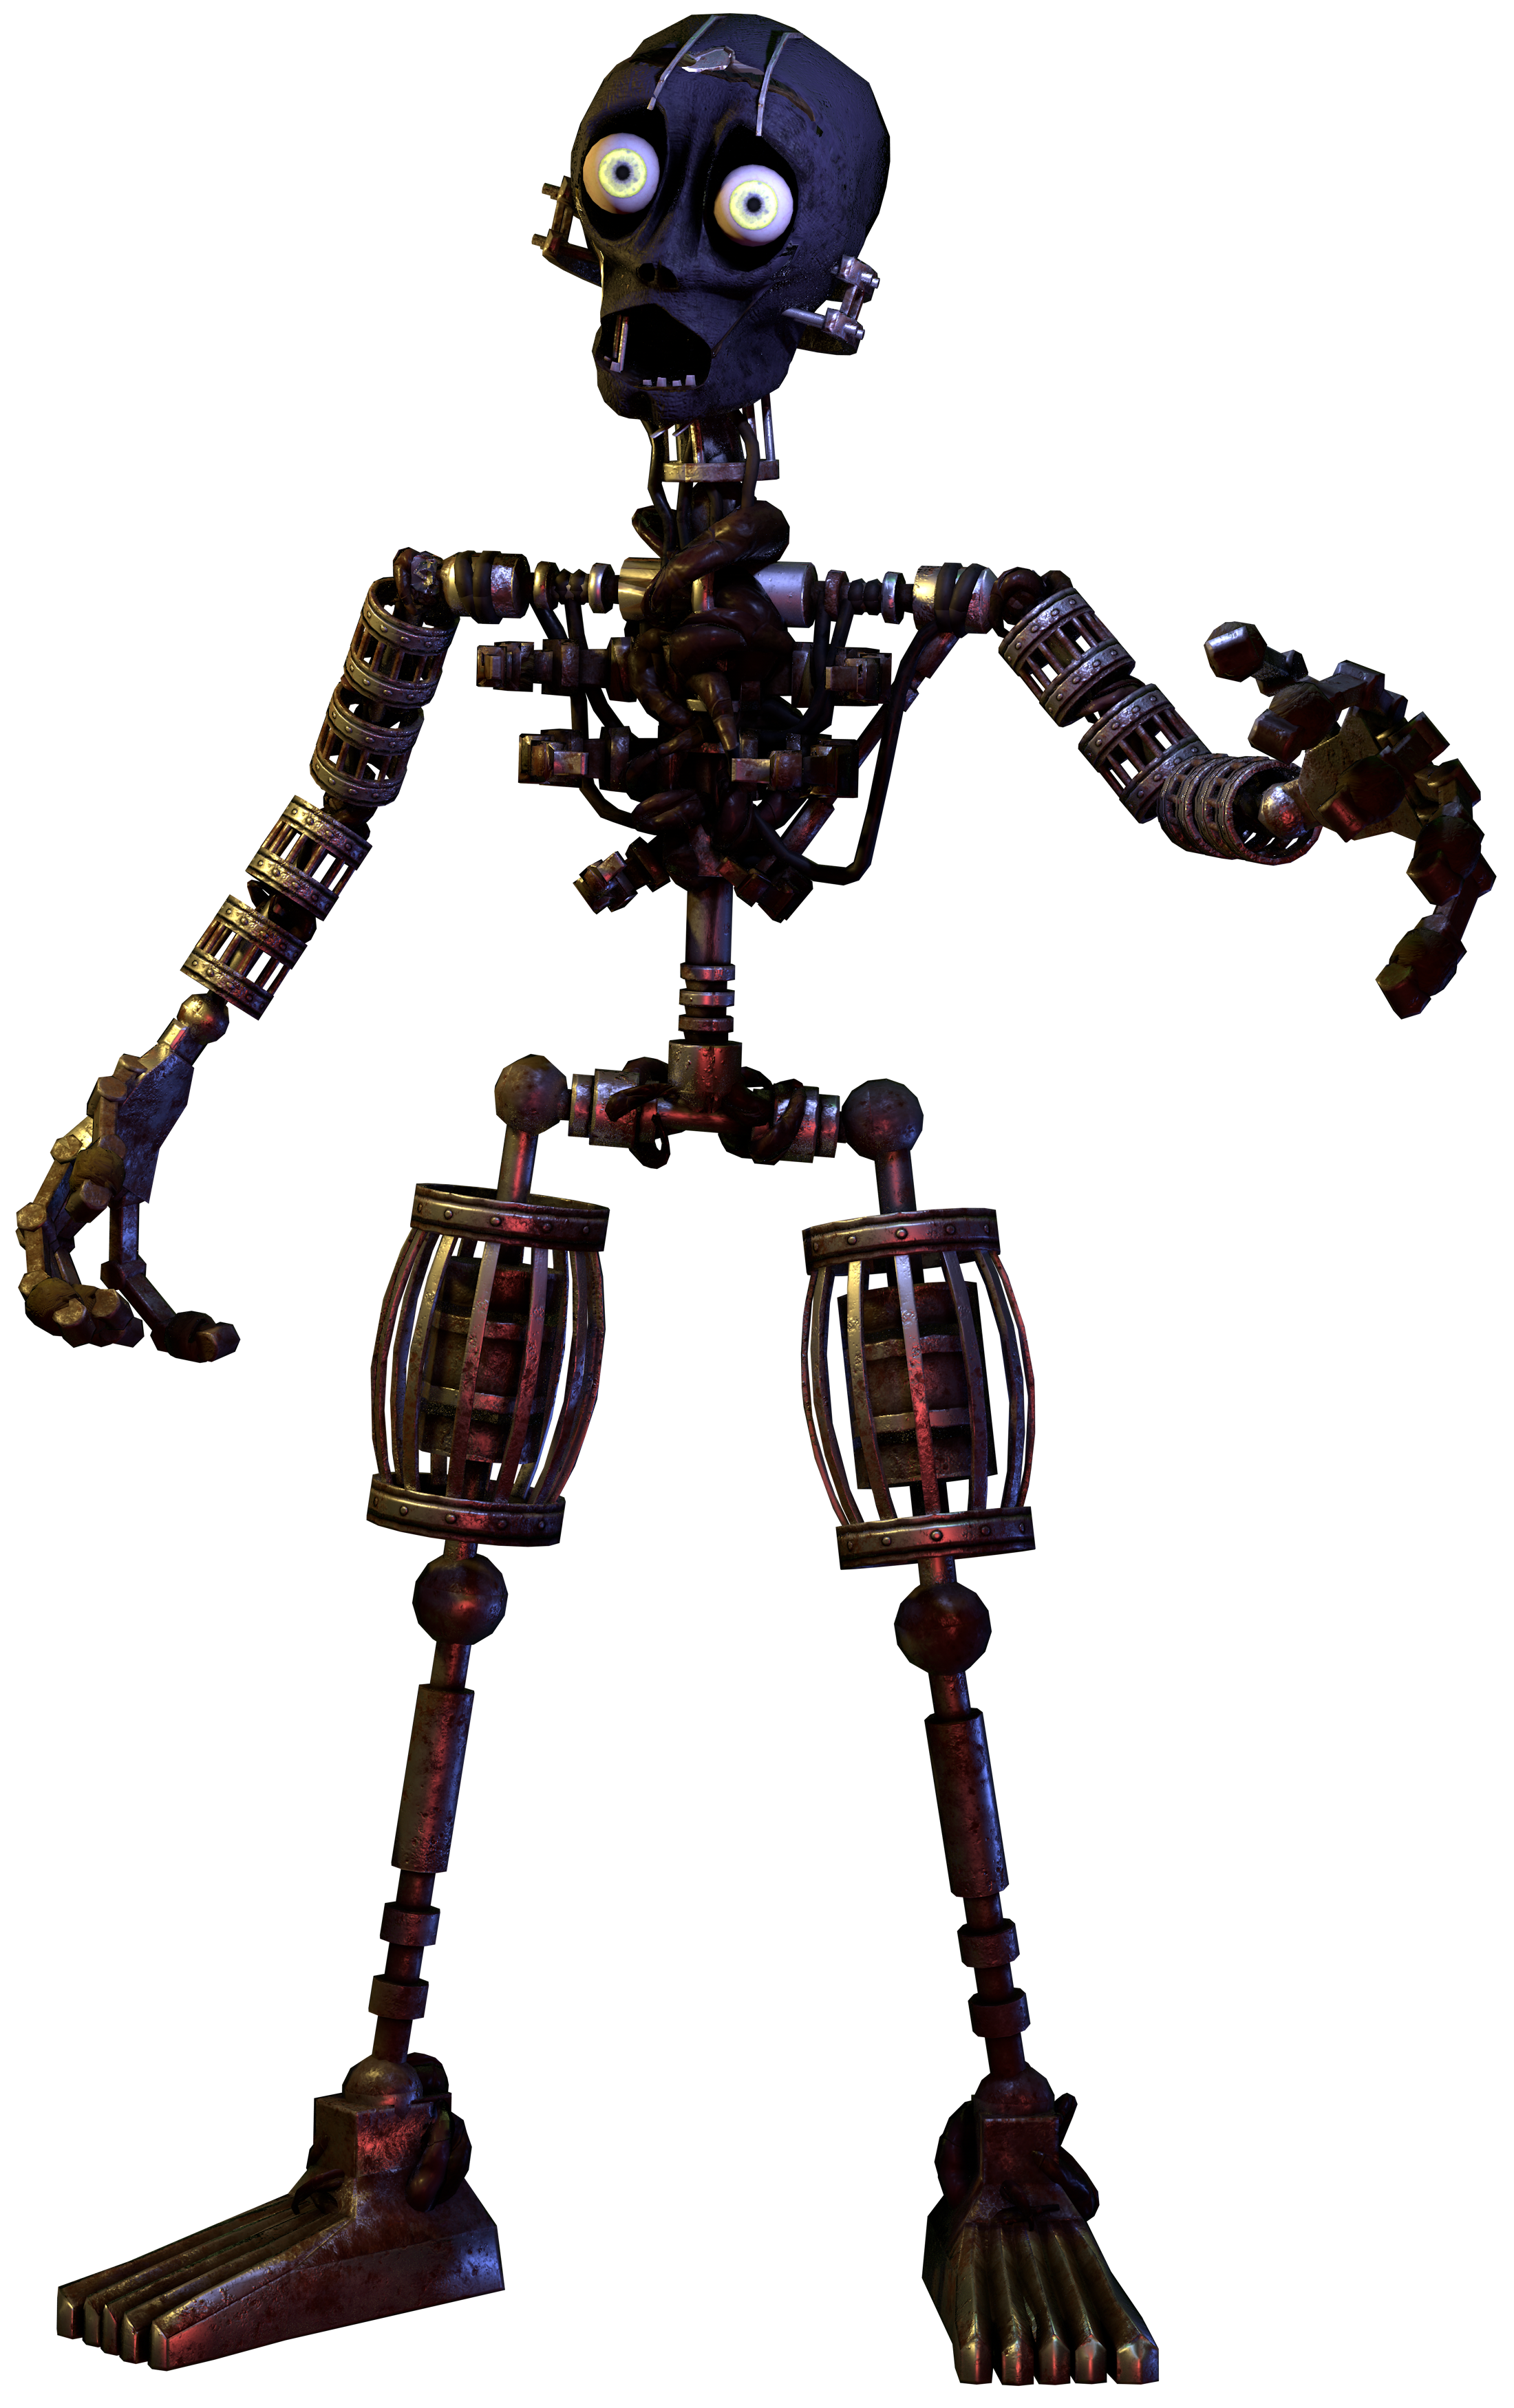 Joy of Creation reference not sure if a trillion people have already posted  it but yeah : r/fivenightsatfreddys